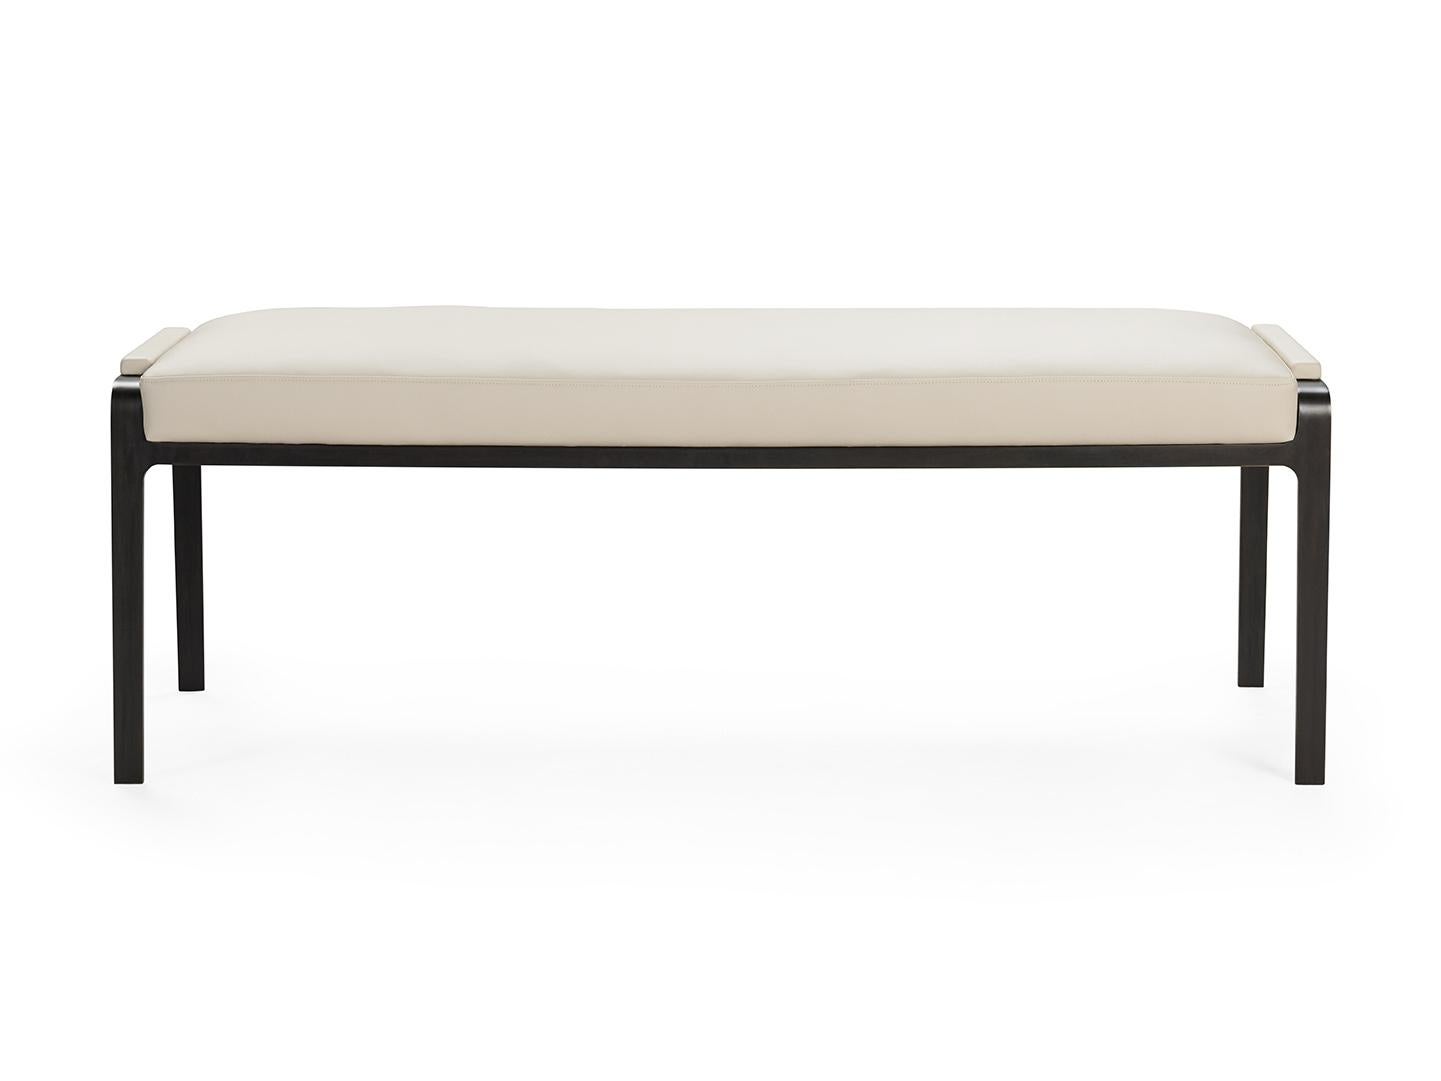 Gazelle bench is both minimal and luxurious. A delicate metal framework raises the seat and wraps the back emphasizing the chairs dynamic stance. This timeless design with its energetic proportions echoes its graceful namesake animal. Appearing